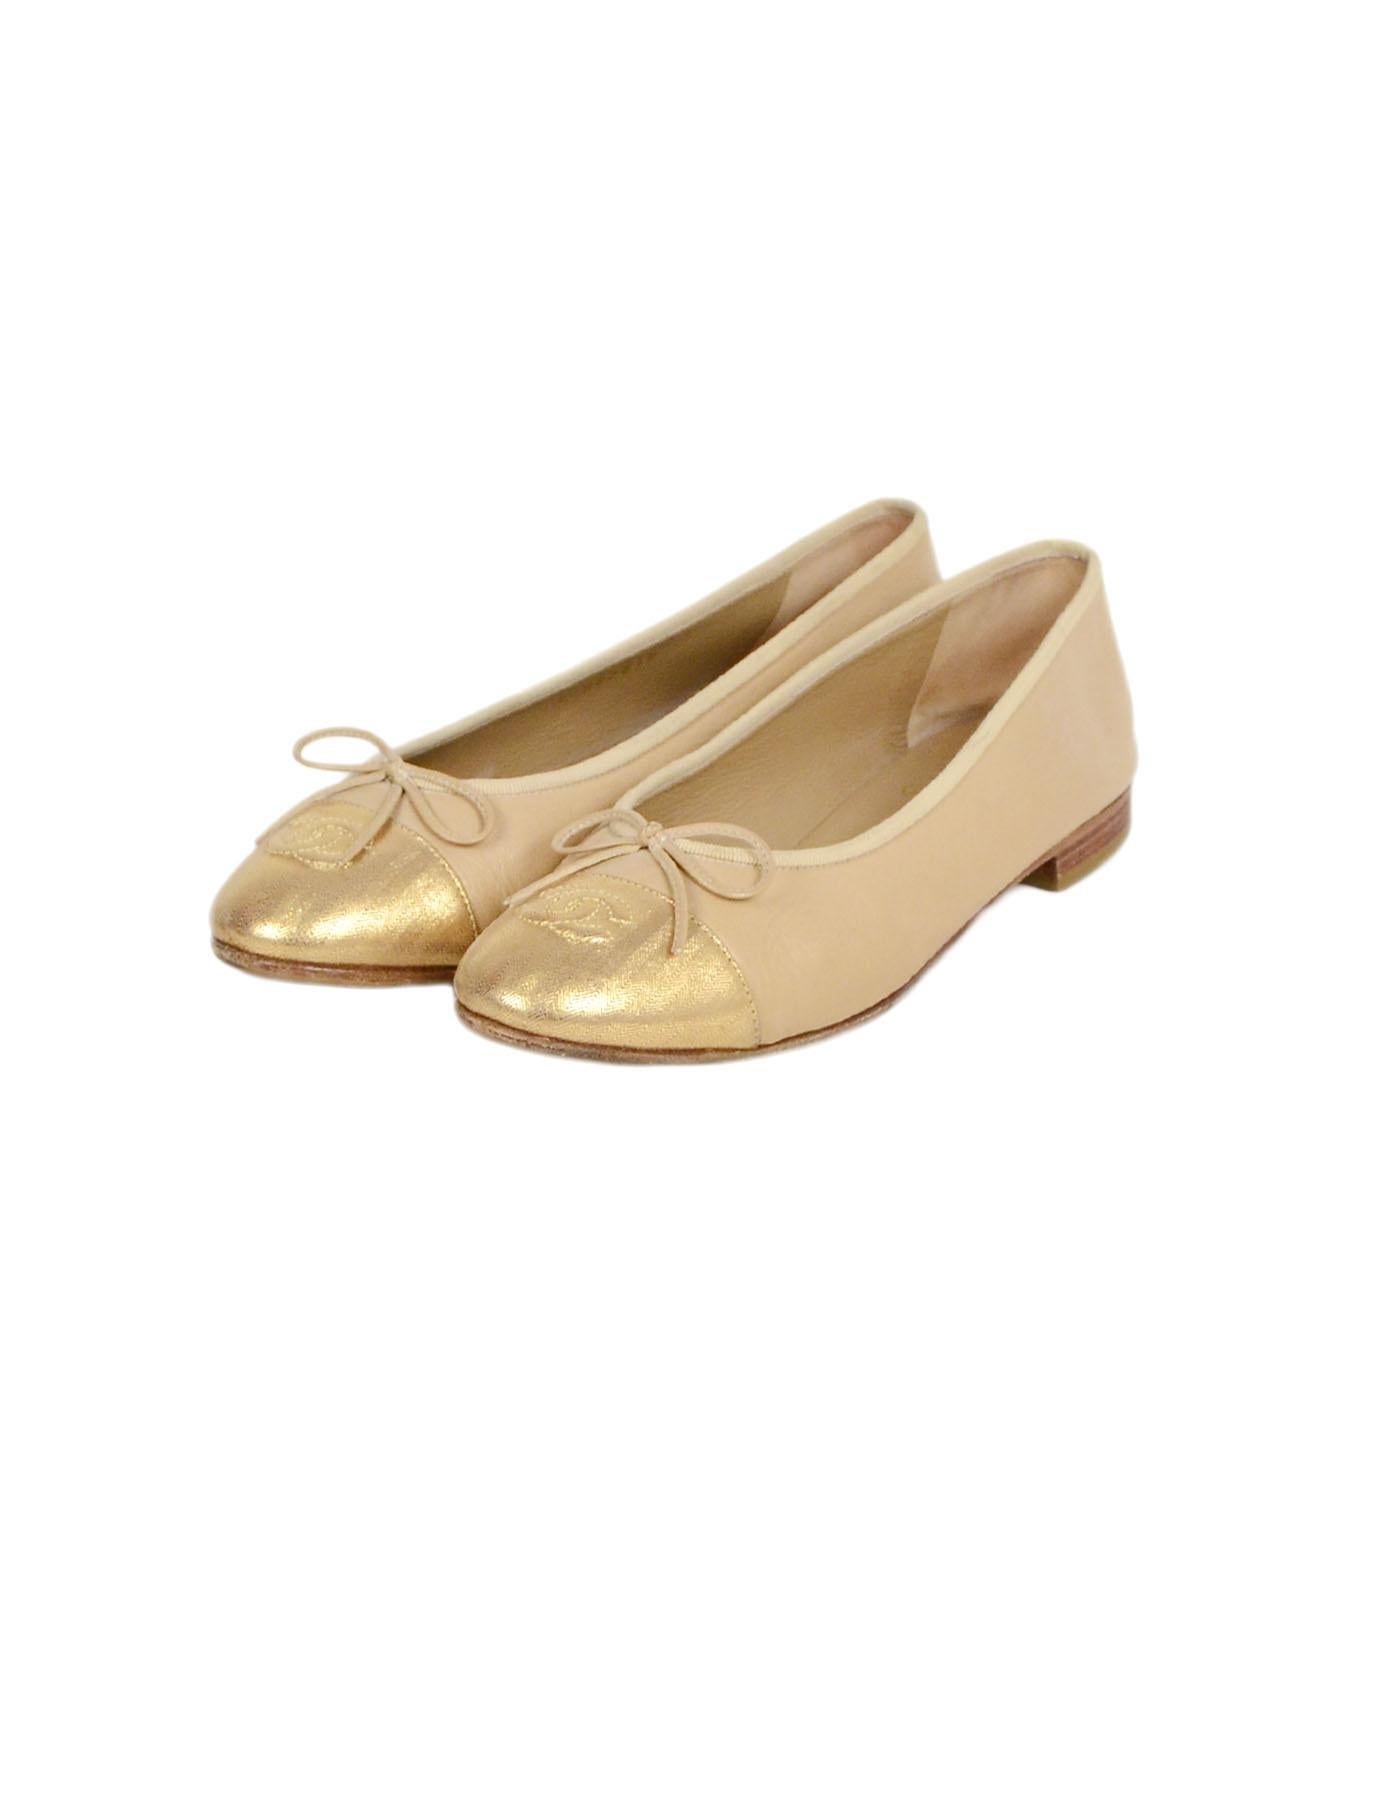 Chanel Beige/Gold Leather Cap Toe CC Ballet Flats sz 39.5

Made In: Italy
Color: Beige, gold
Materials: Leather
Closure/Opening: Slide on 
Overall Condition: Excellent pre-owned condition with the exception of light wear a back and soles, light wear